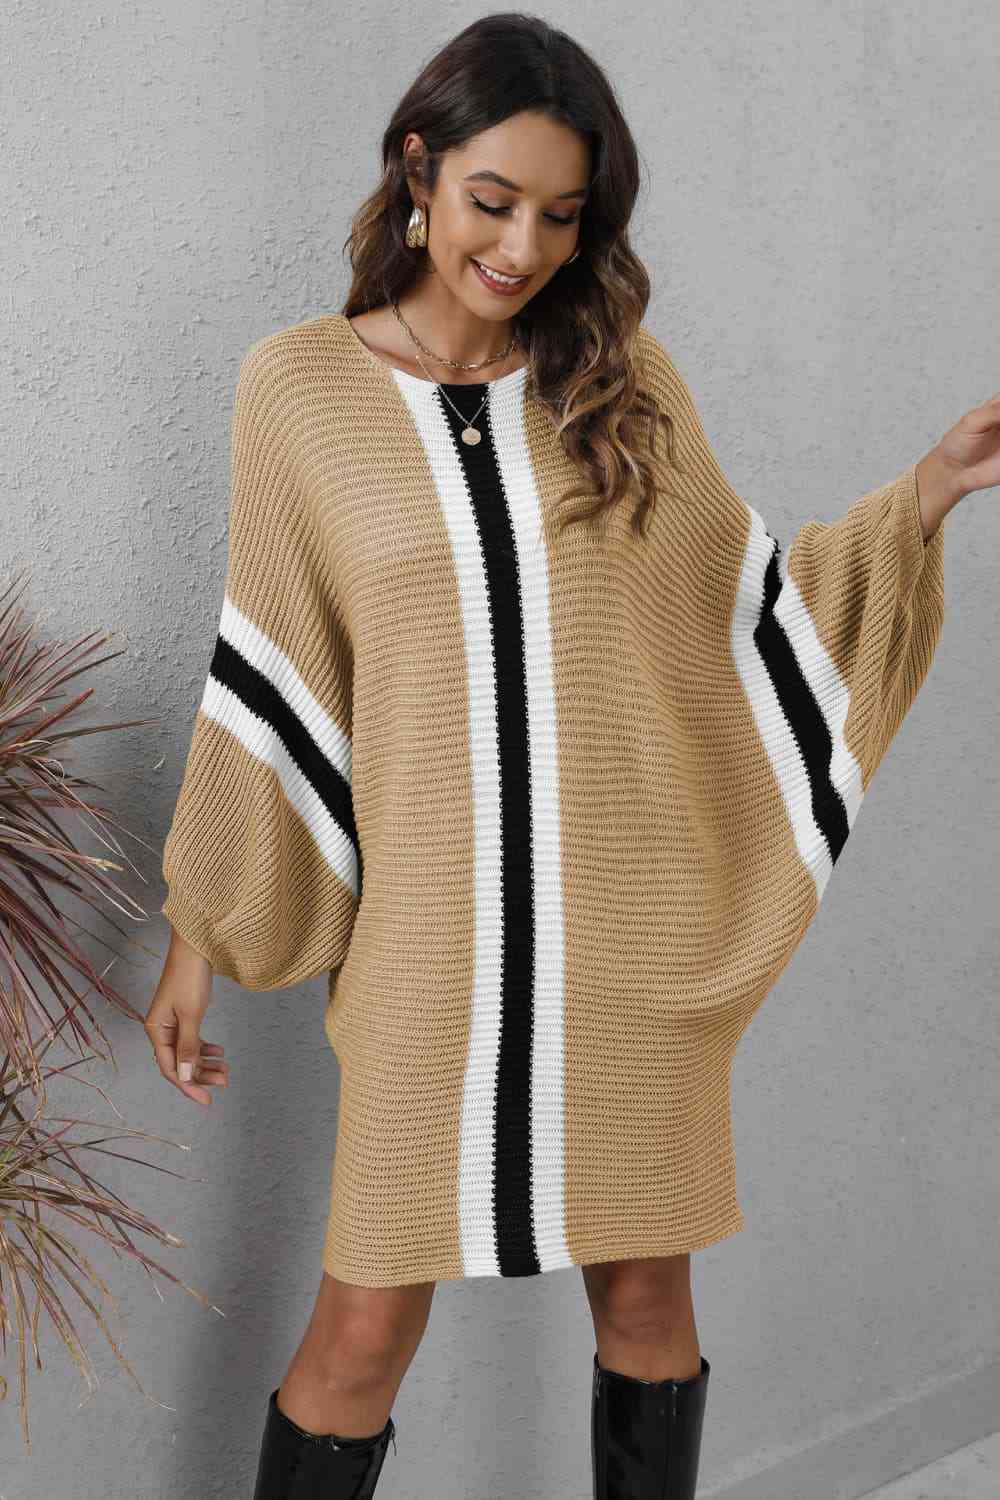 Trendsi Dresses Gypsy Oven Ribbed Round Neck Sweater Dress